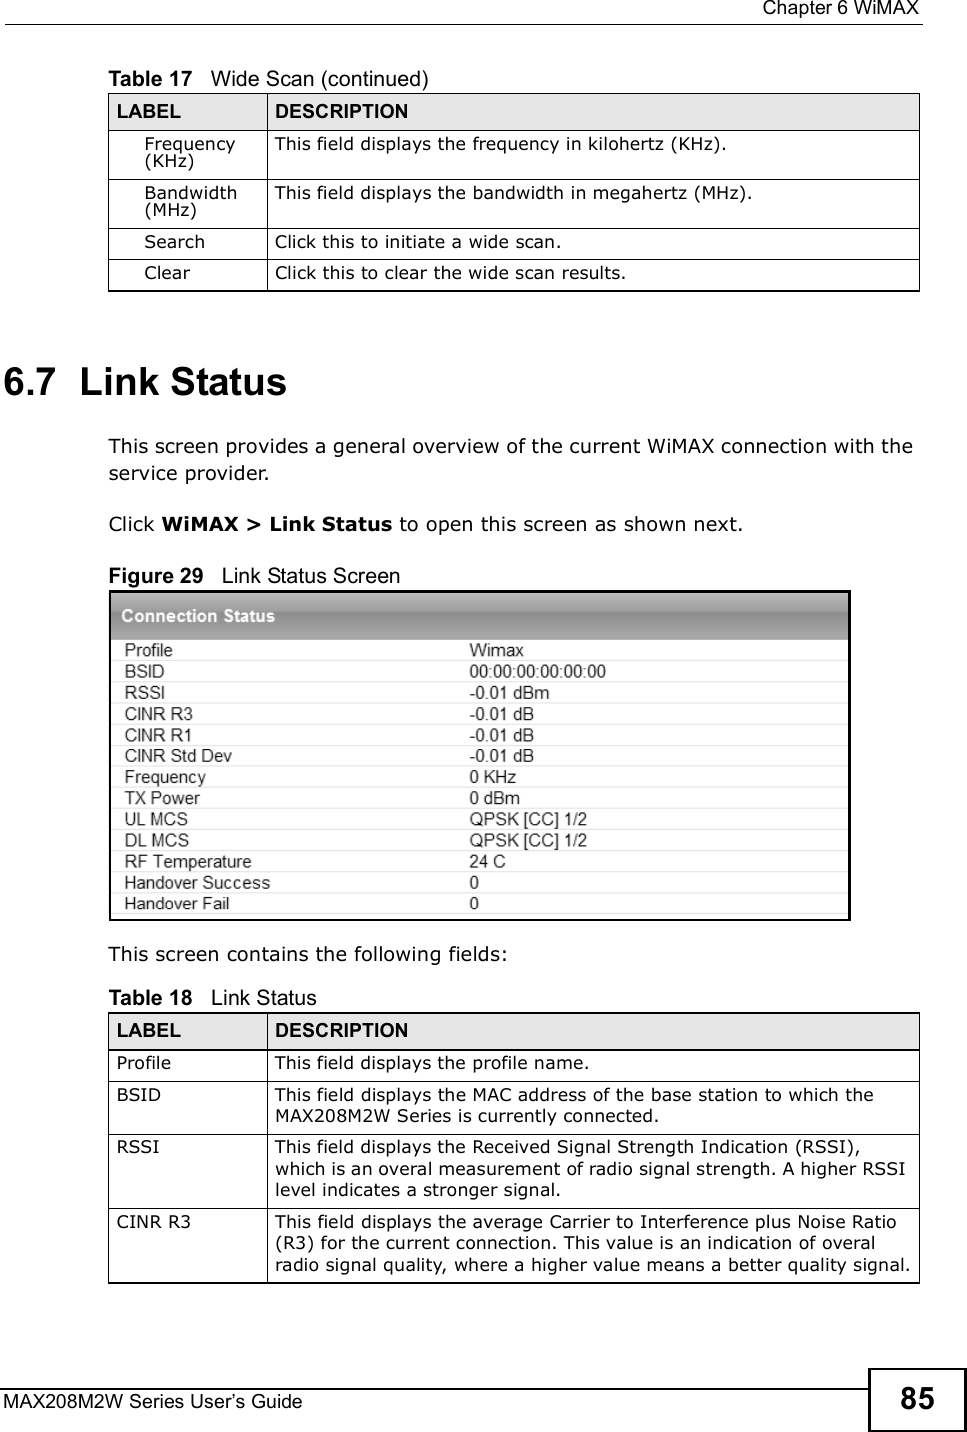  Chapter 6WiMAXMAX208M2W Series User s Guide 856.7  Link StatusThis screen provides a general overview of the current WiMAX connection with the service provider.Click WiMAX &gt; Link Status to open this screen as shown next.Figure 29   Link Status ScreenThis screen contains the following fields:Frequency (KHz)This field displays the frequency in kilohertz (KHz).Bandwidth (MHz)This field displays the bandwidth in megahertz (MHz).SearchClick this to initiate a wide scan.ClearClick this to clear the wide scan results.Table 17   Wide Scan (continued)LABEL DESCRIPTIONTable 18   Link StatusLABEL DESCRIPTIONProfileThis field displays the profile name.BSIDThis field displays the MAC address of the base station to which the MAX208M2W Series is currently connected.RSSIThis field displays the Received Signal Strength Indication (RSSI), which is an overal measurement of radio signal strength. A higher RSSI level indicates a stronger signal.CINR R3This field displays the average Carrier to Interference plus Noise Ratio (R3) for the current connection. This value is an indication of overal radio signal quality, where a higher value means a better quality signal.